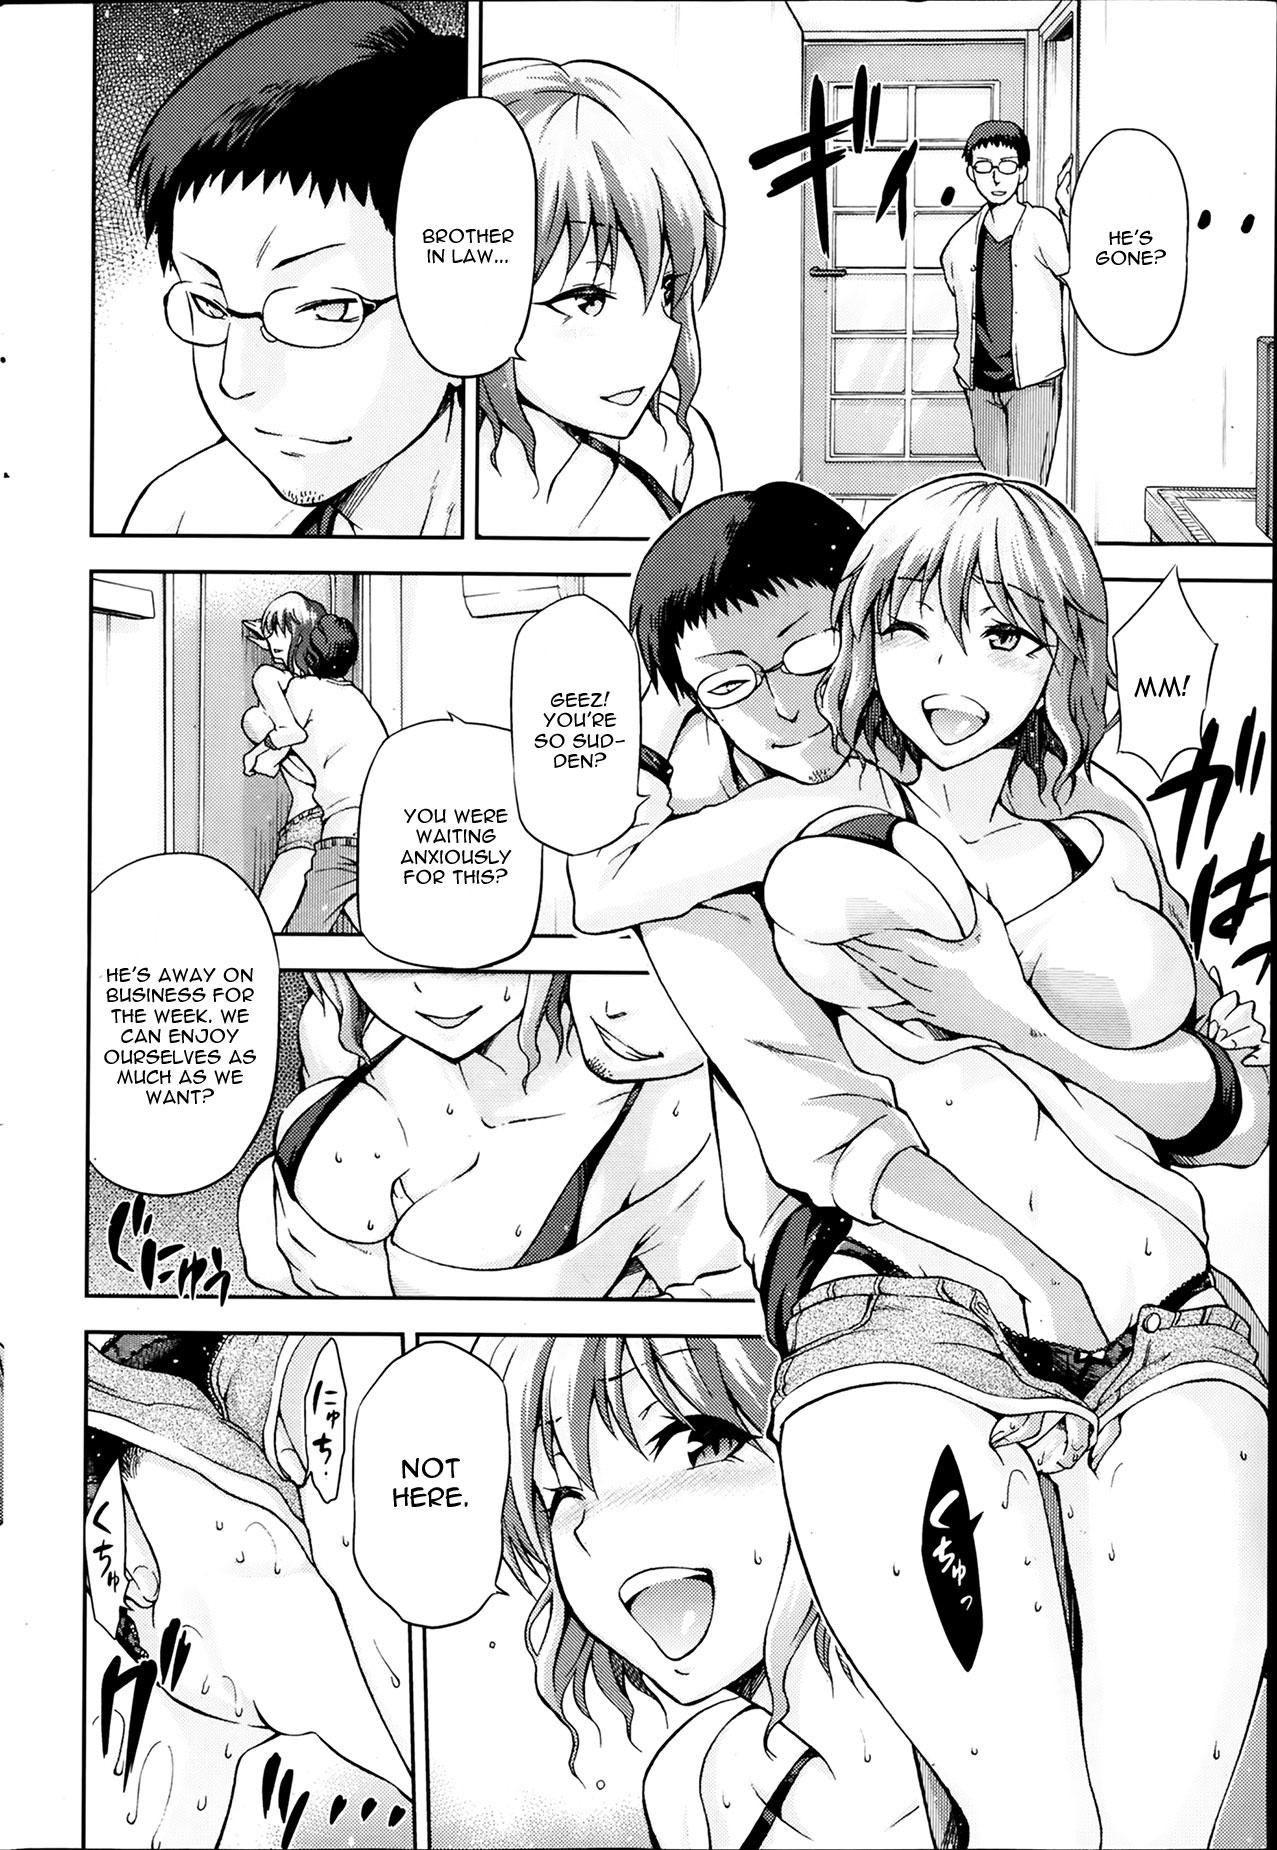 Bald Pussy 72 Anime - Page 2